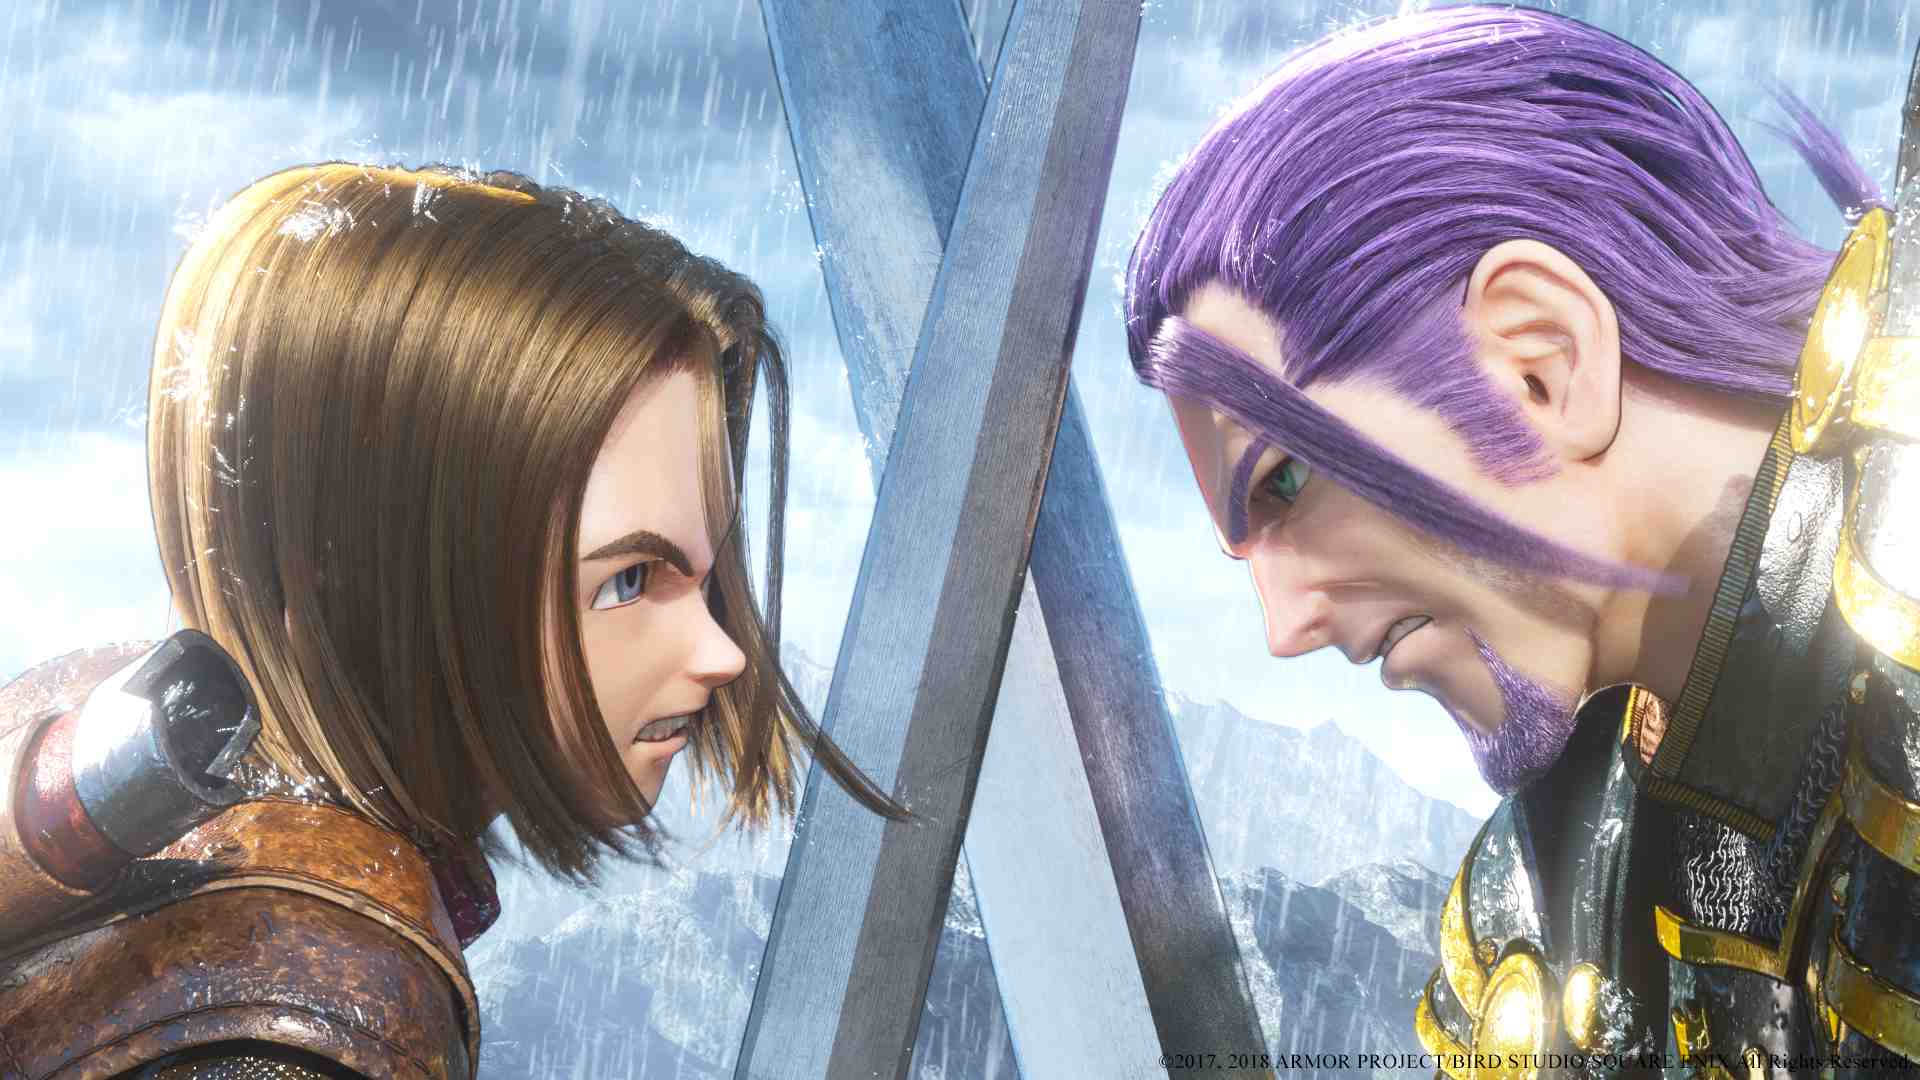 DRAGON QUEST XI: ECHOES OF AN ELUSIVE AGE Review